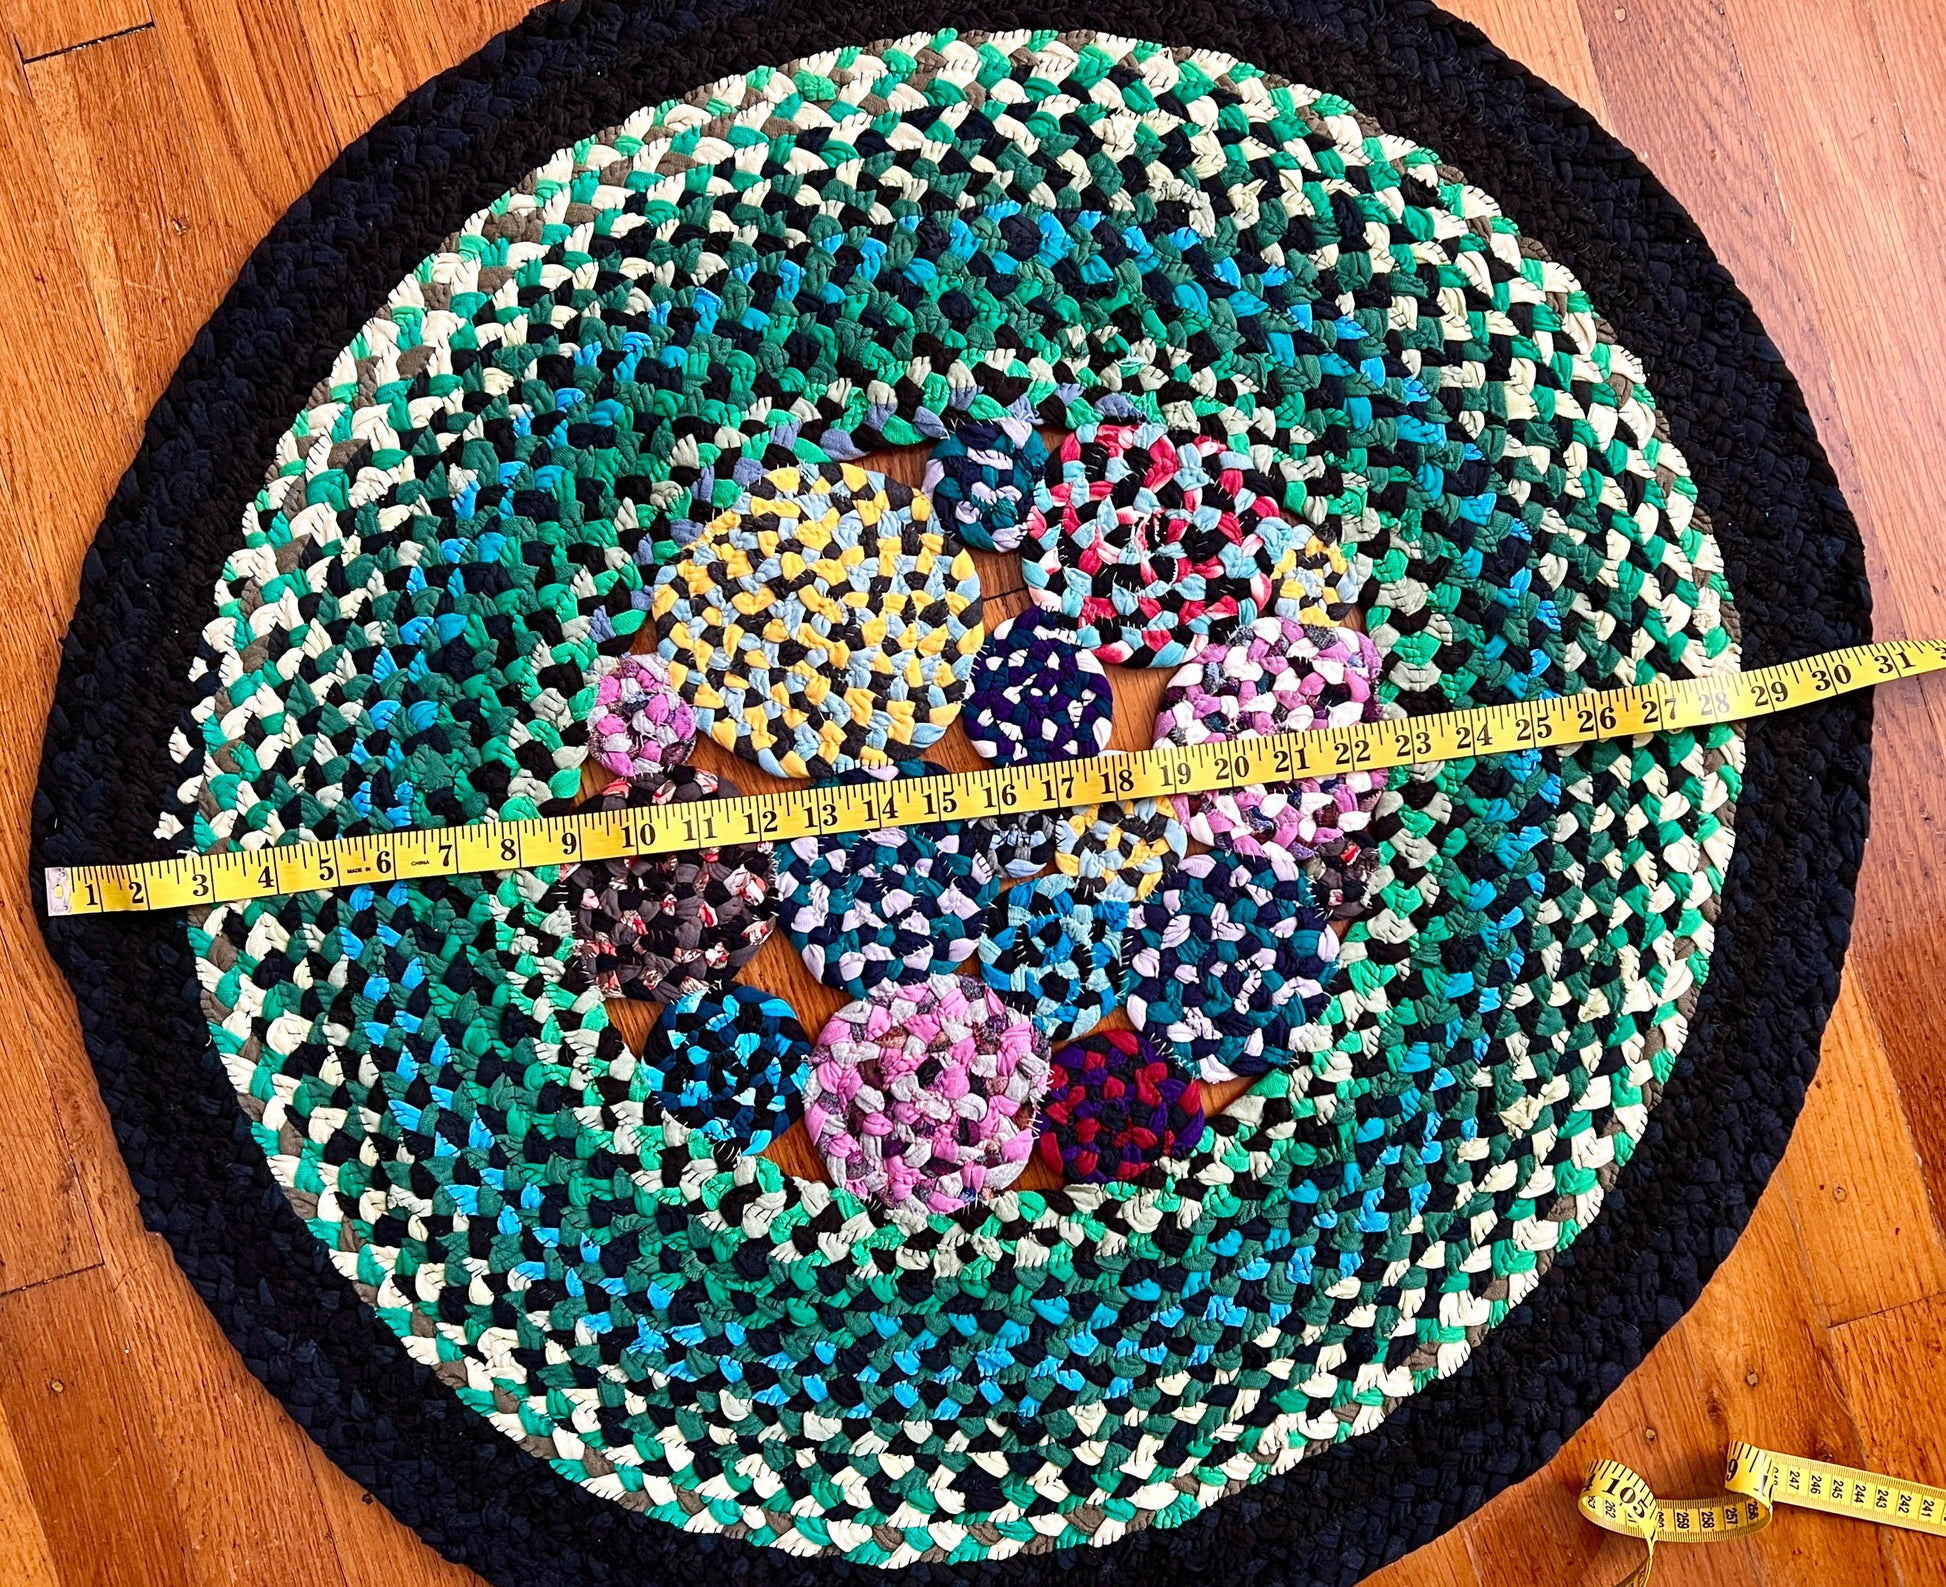 aerial view of green garden rug, with measuring tape across the diameter, showing 30.5 inches